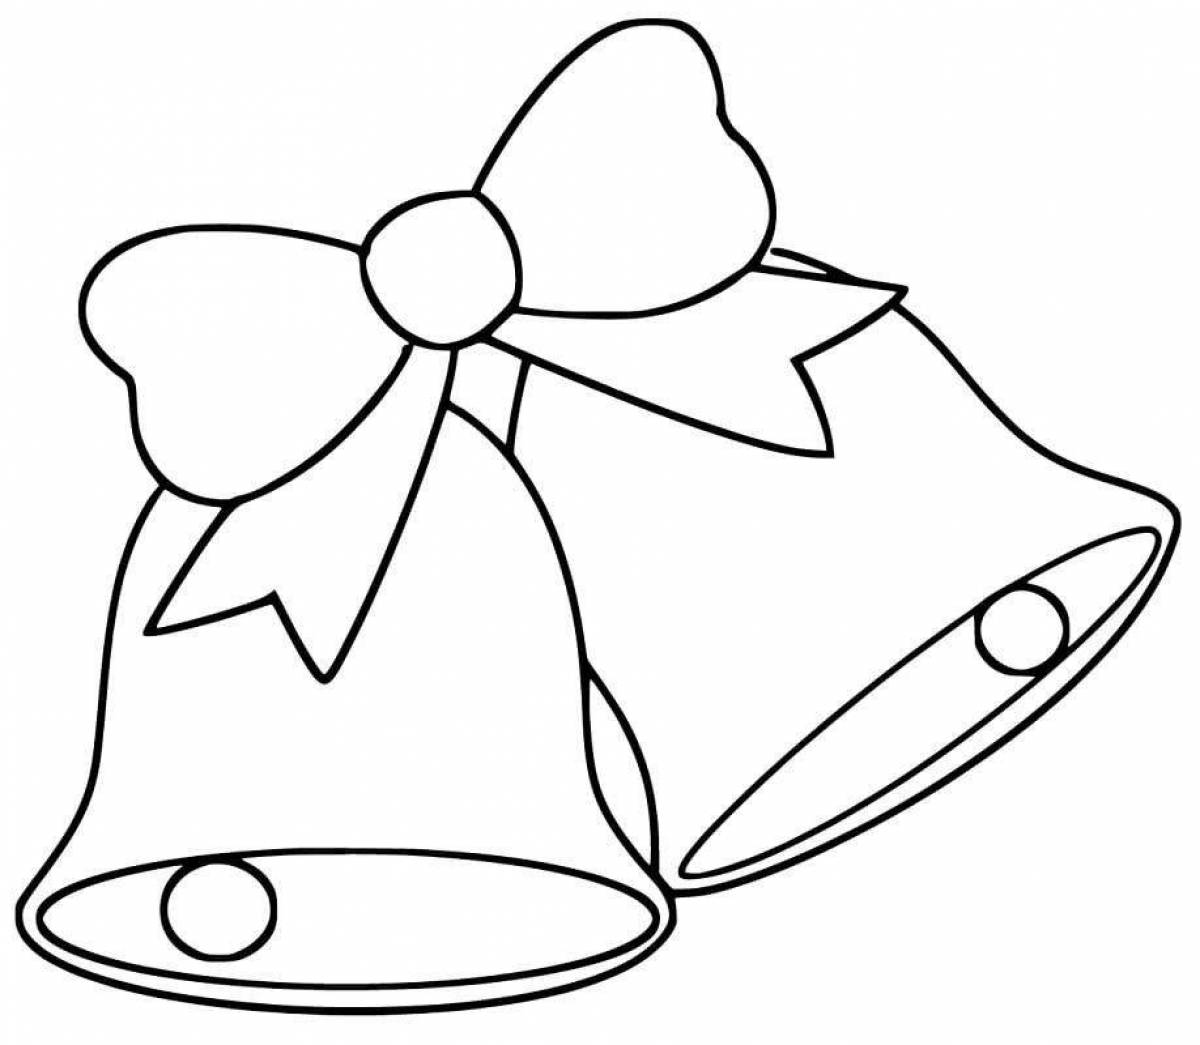 Fun coloring book bell for kids